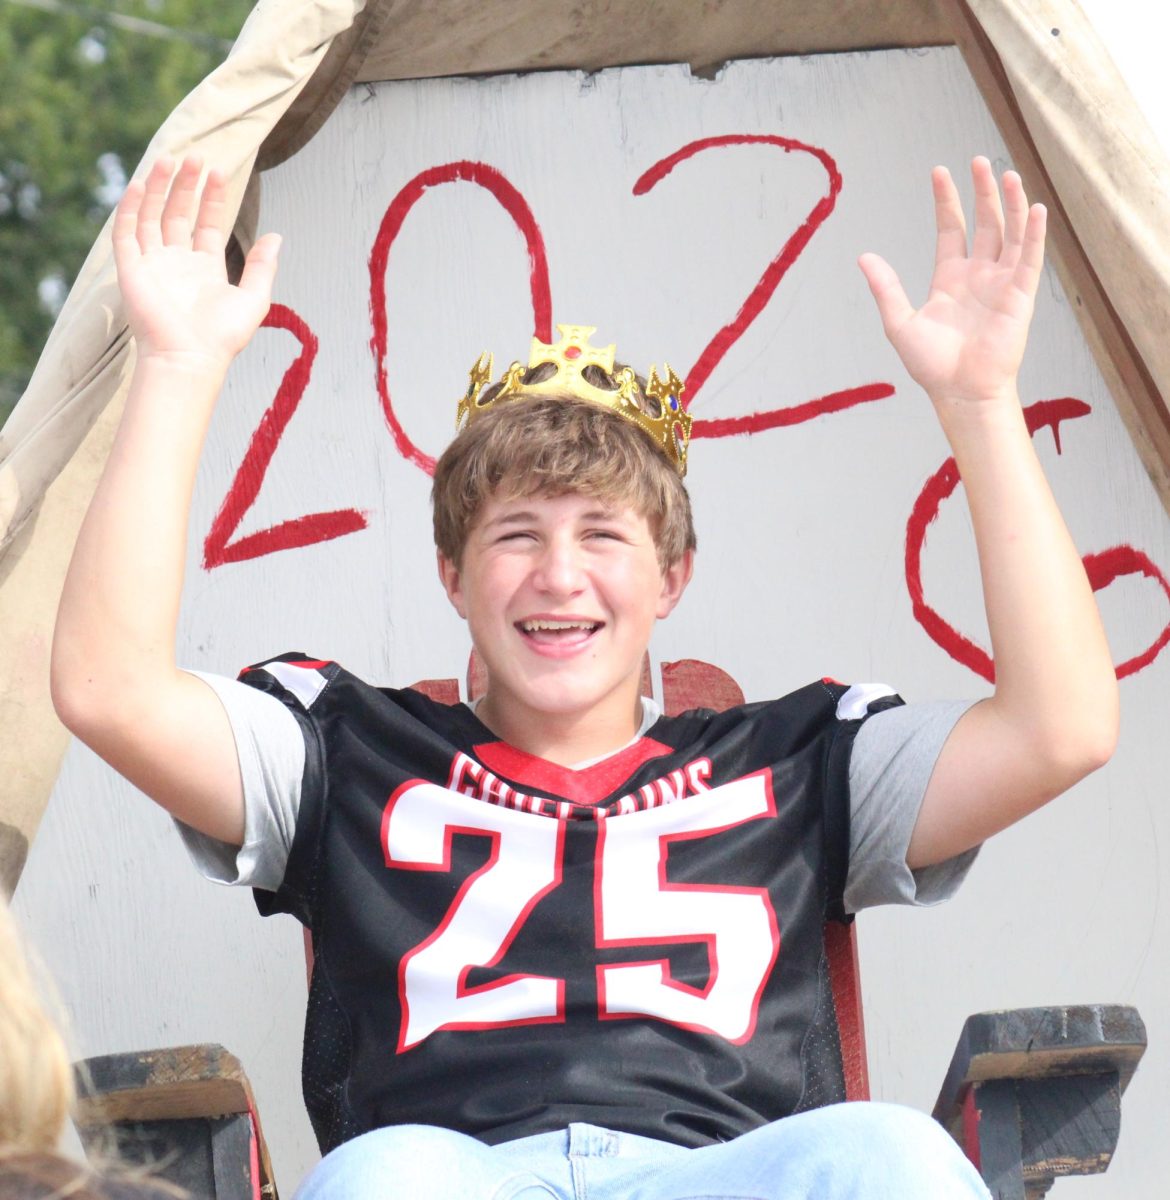 During the homecoming parade, sophomore Jaxon Wood imitates a king for his class’s float. Wood and his classmates decided to have the Tigers “bow down” to the Chieftains for their theme. “It was a lot of painting and setting up stuff, but it was really fun,” Wood said. 